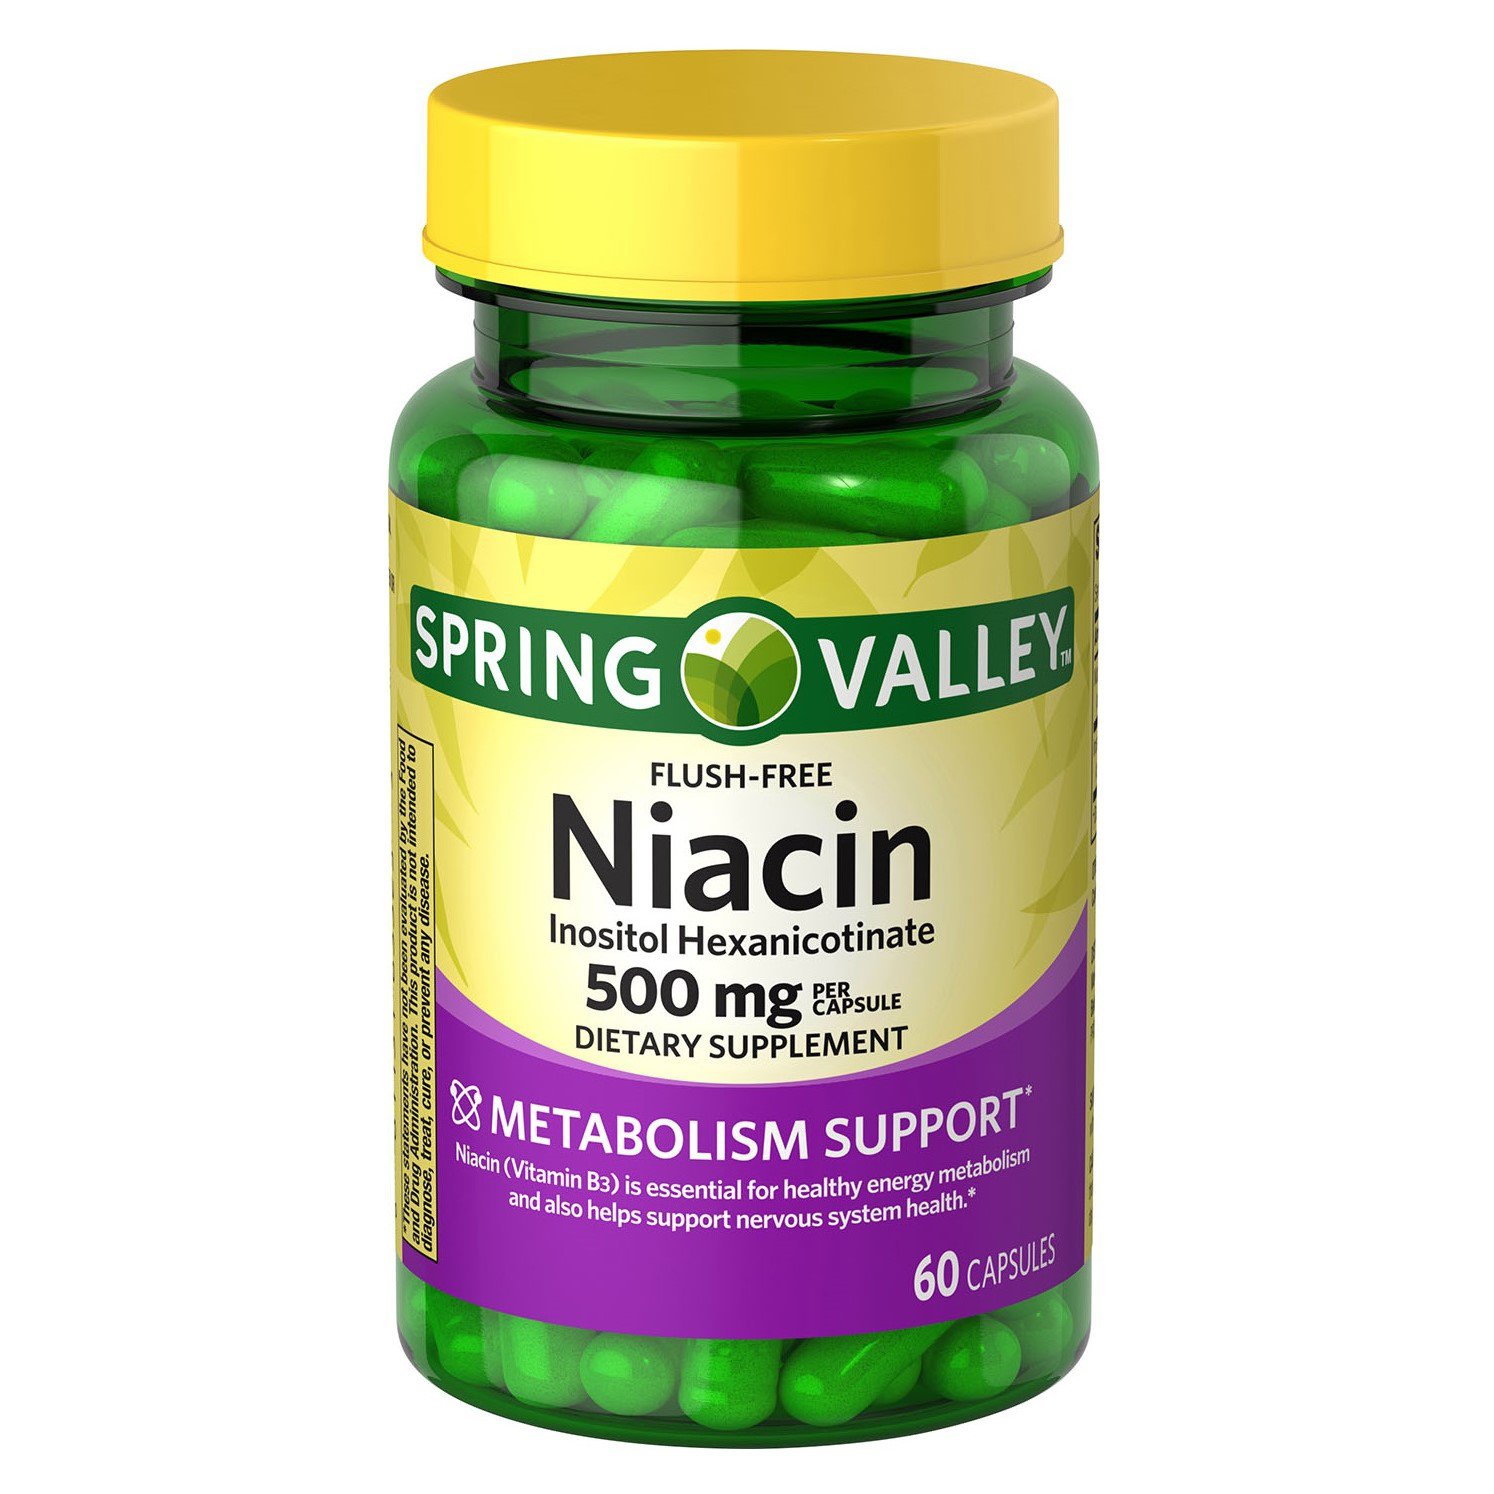 Spring Valley Niacin Capsules 500 mg Metabolism Support 60 Count